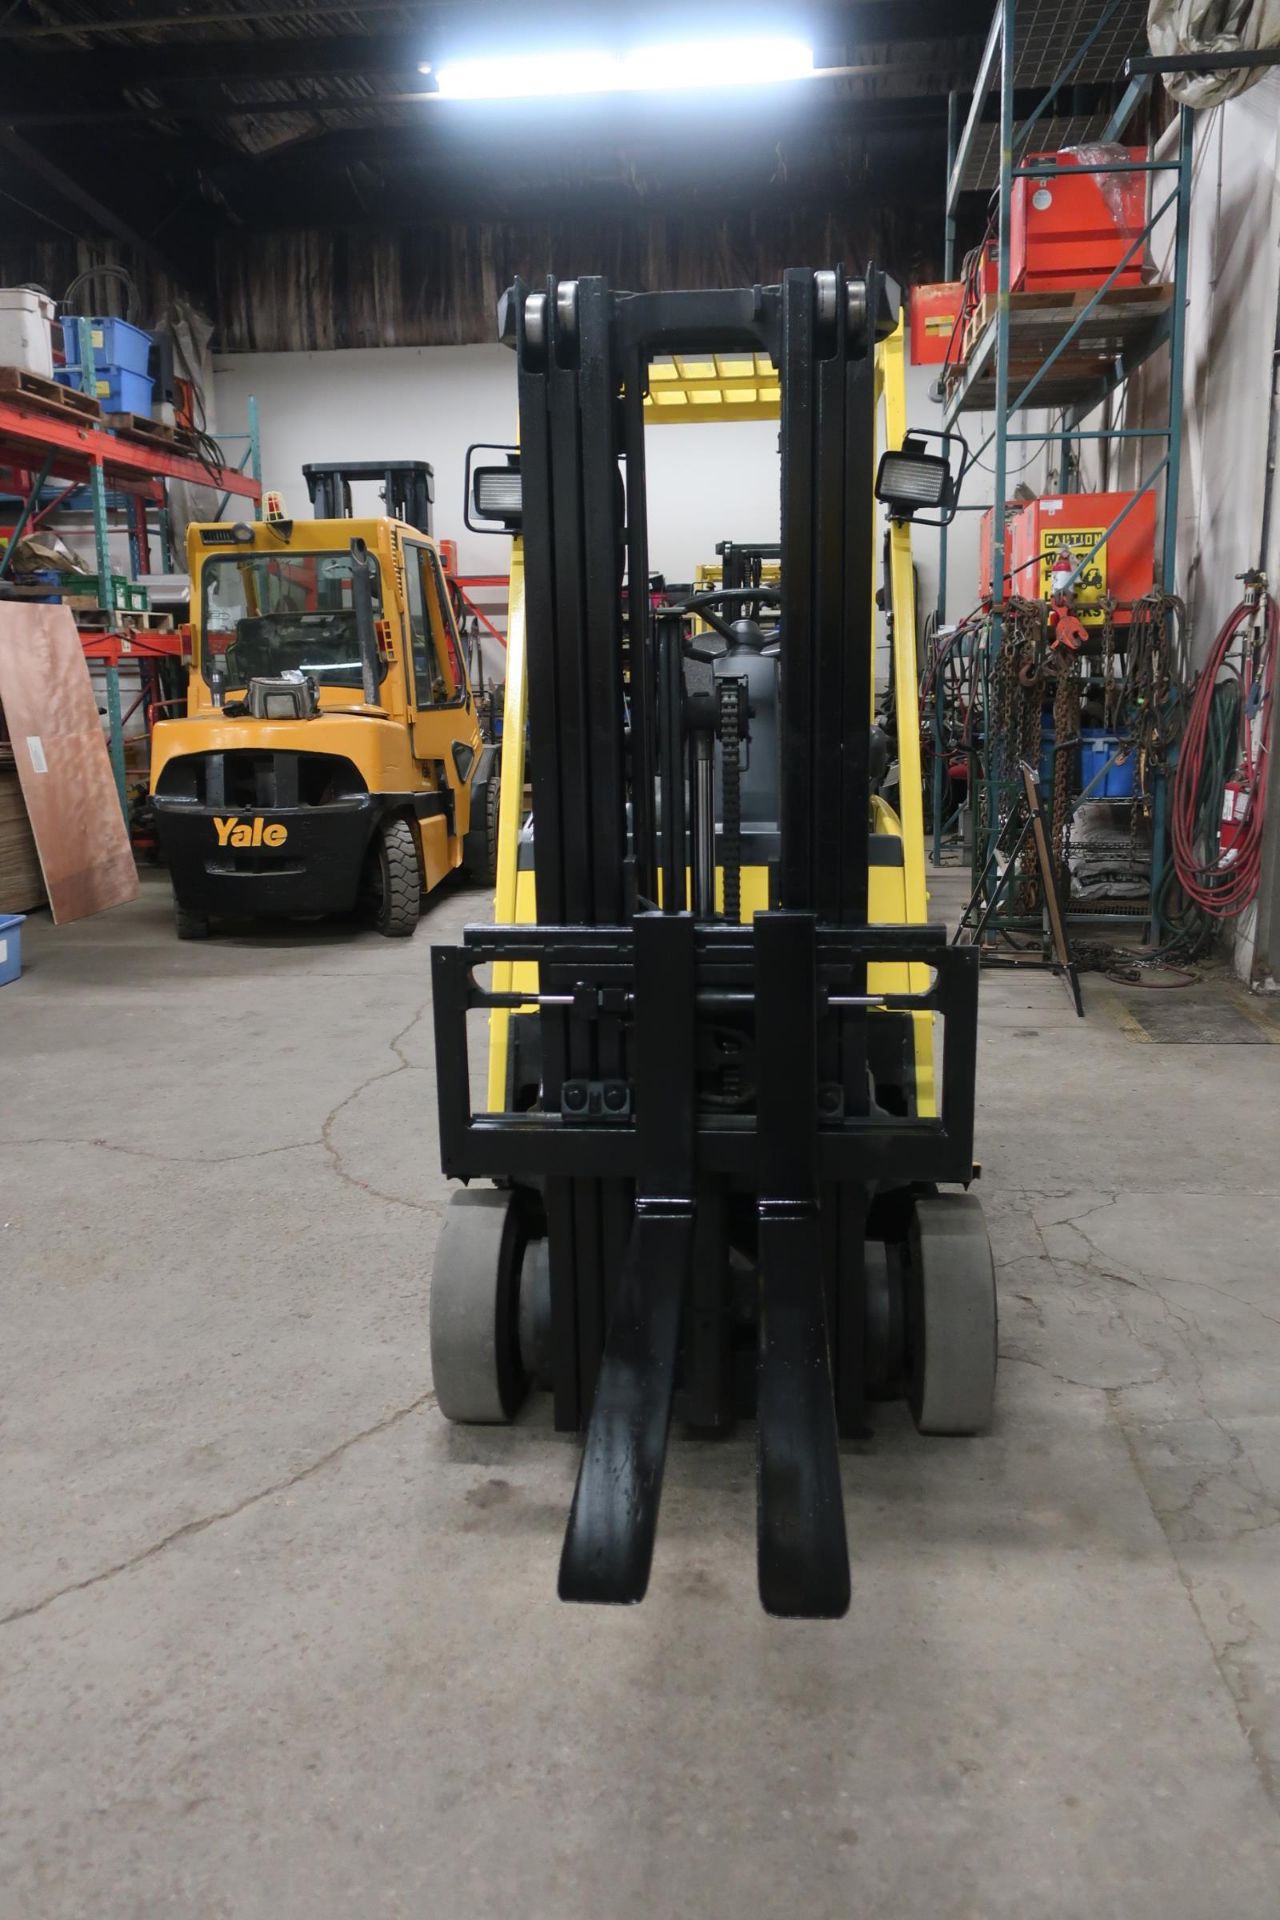 FREE CUSTOMS - Hyster 3500lbs Capacity Forklift Electric with 3-stage mast with sideshift - Image 2 of 2